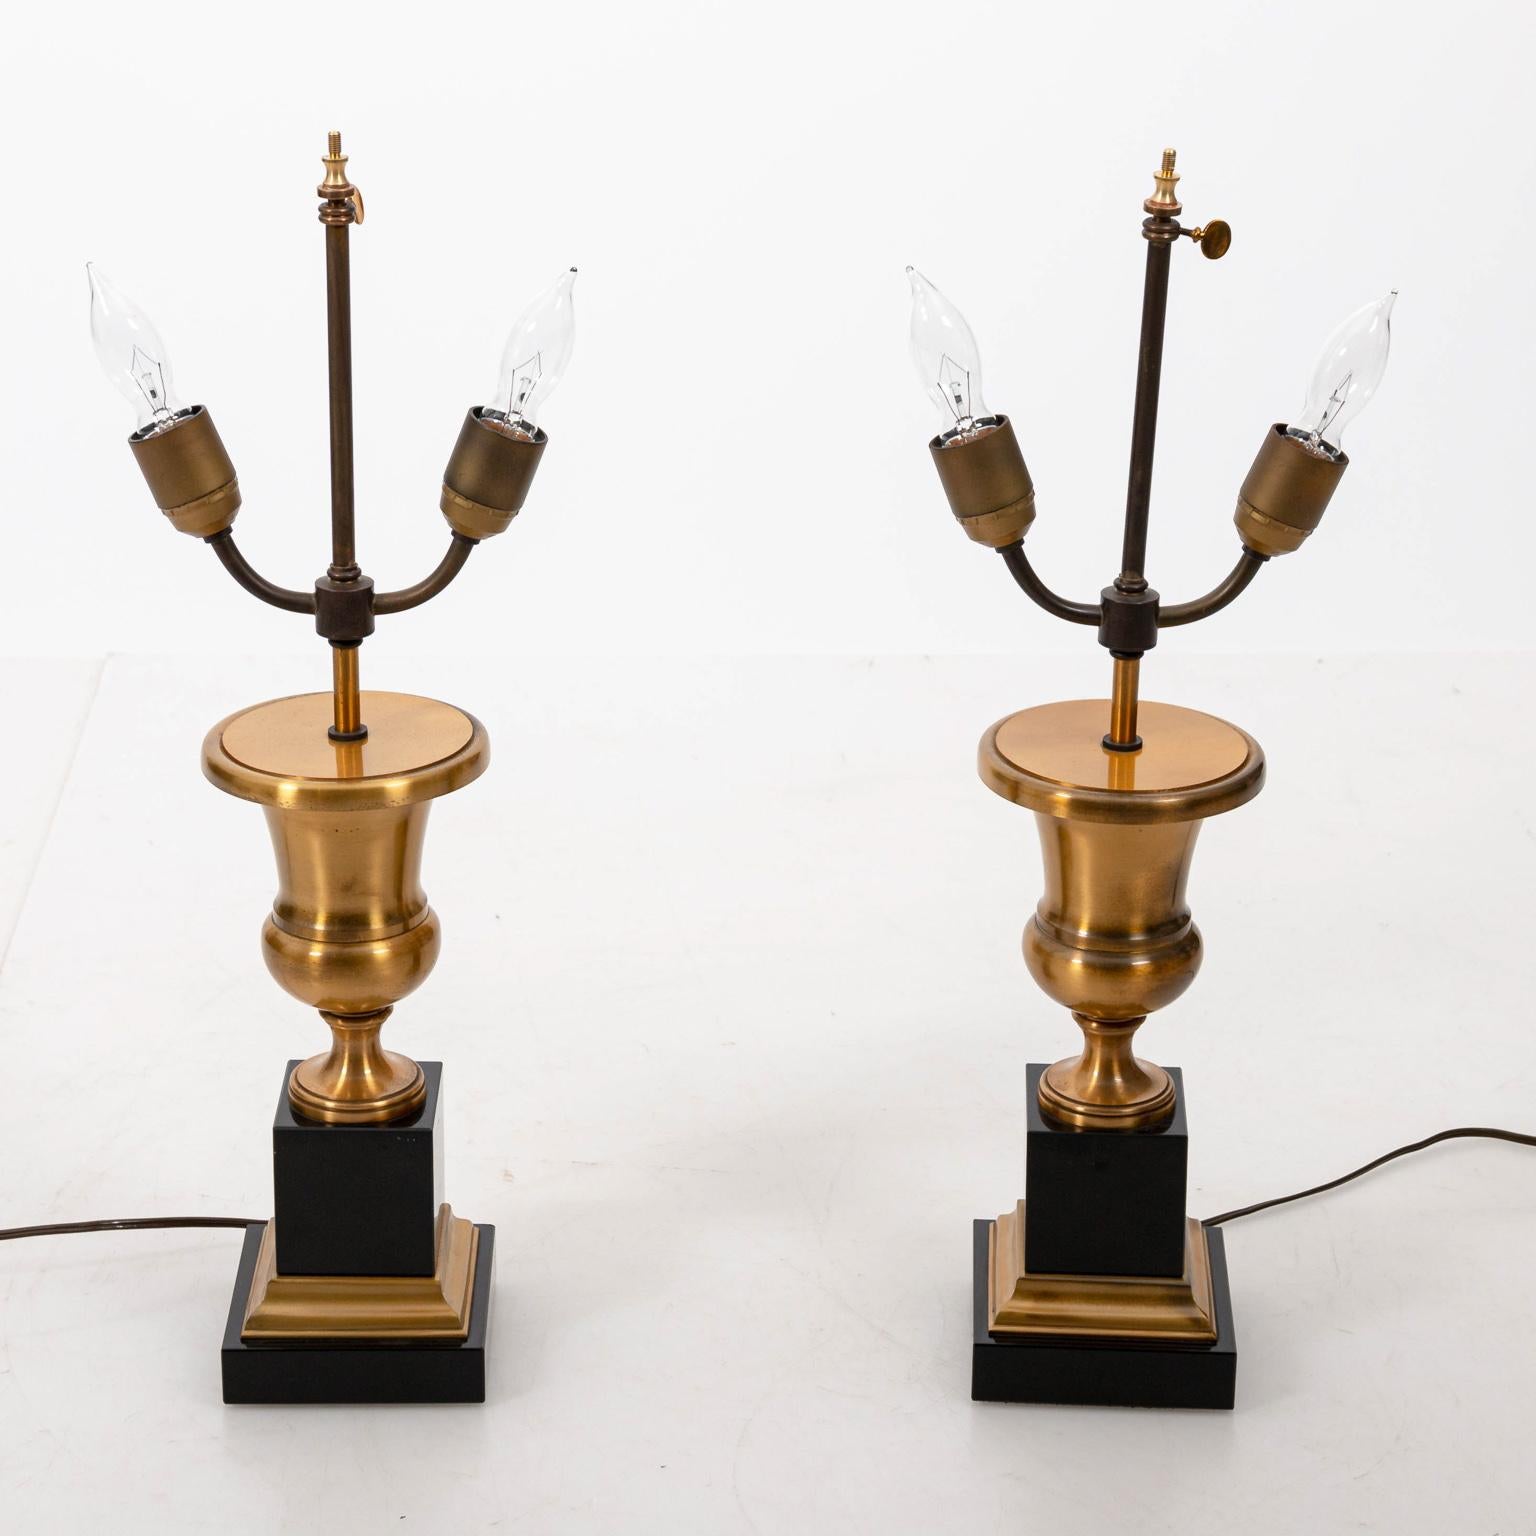 Regency style gold metal urn shaped table lamps on black and gold marble plinth bases, circa 1980s. Made in England. Please note of wear consistent with age.